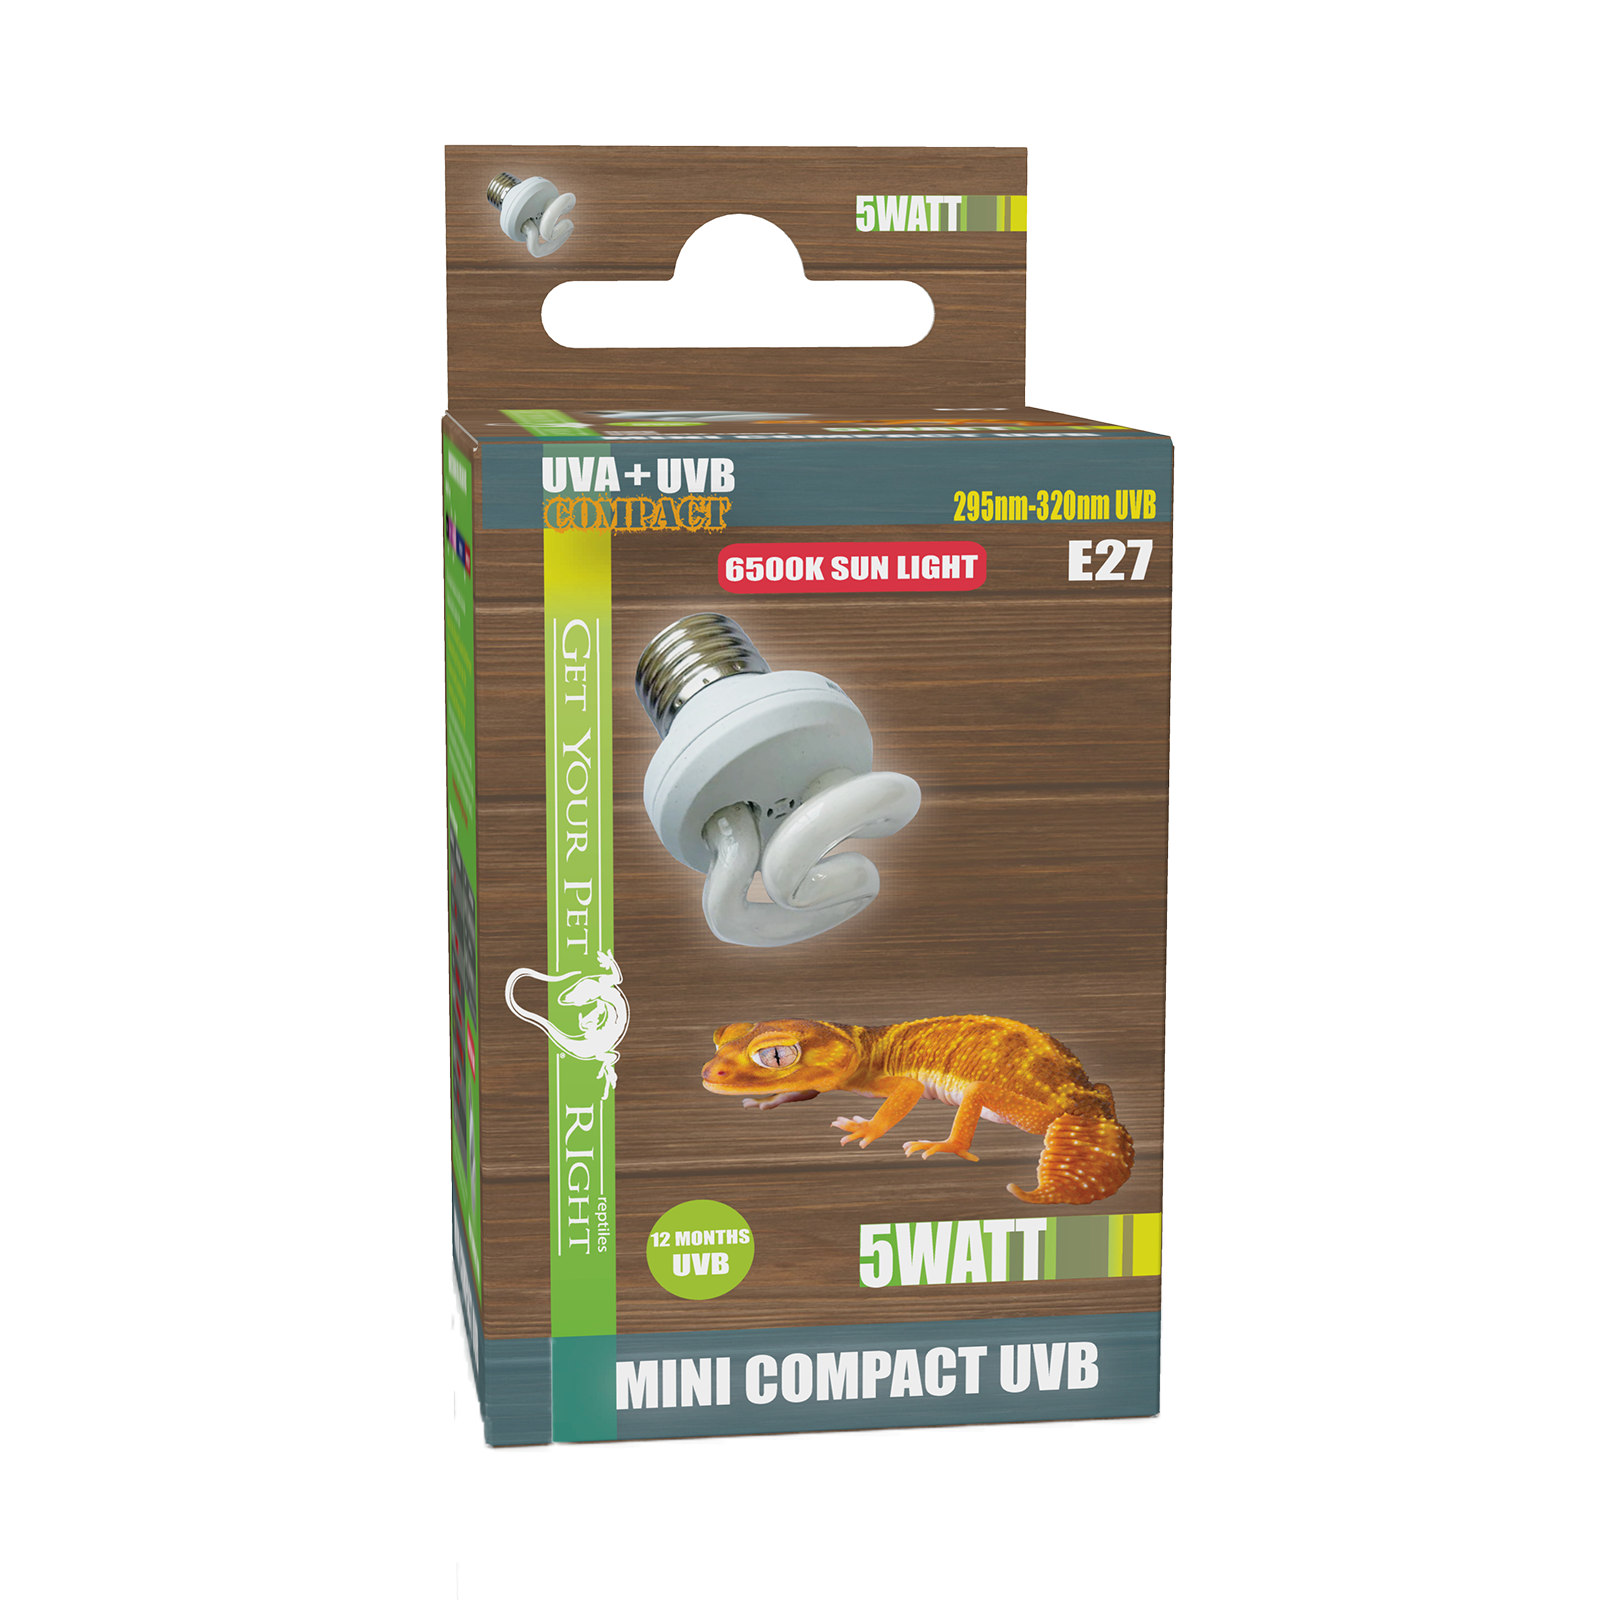 Get Your Pet Right Mini Compact UVB Light